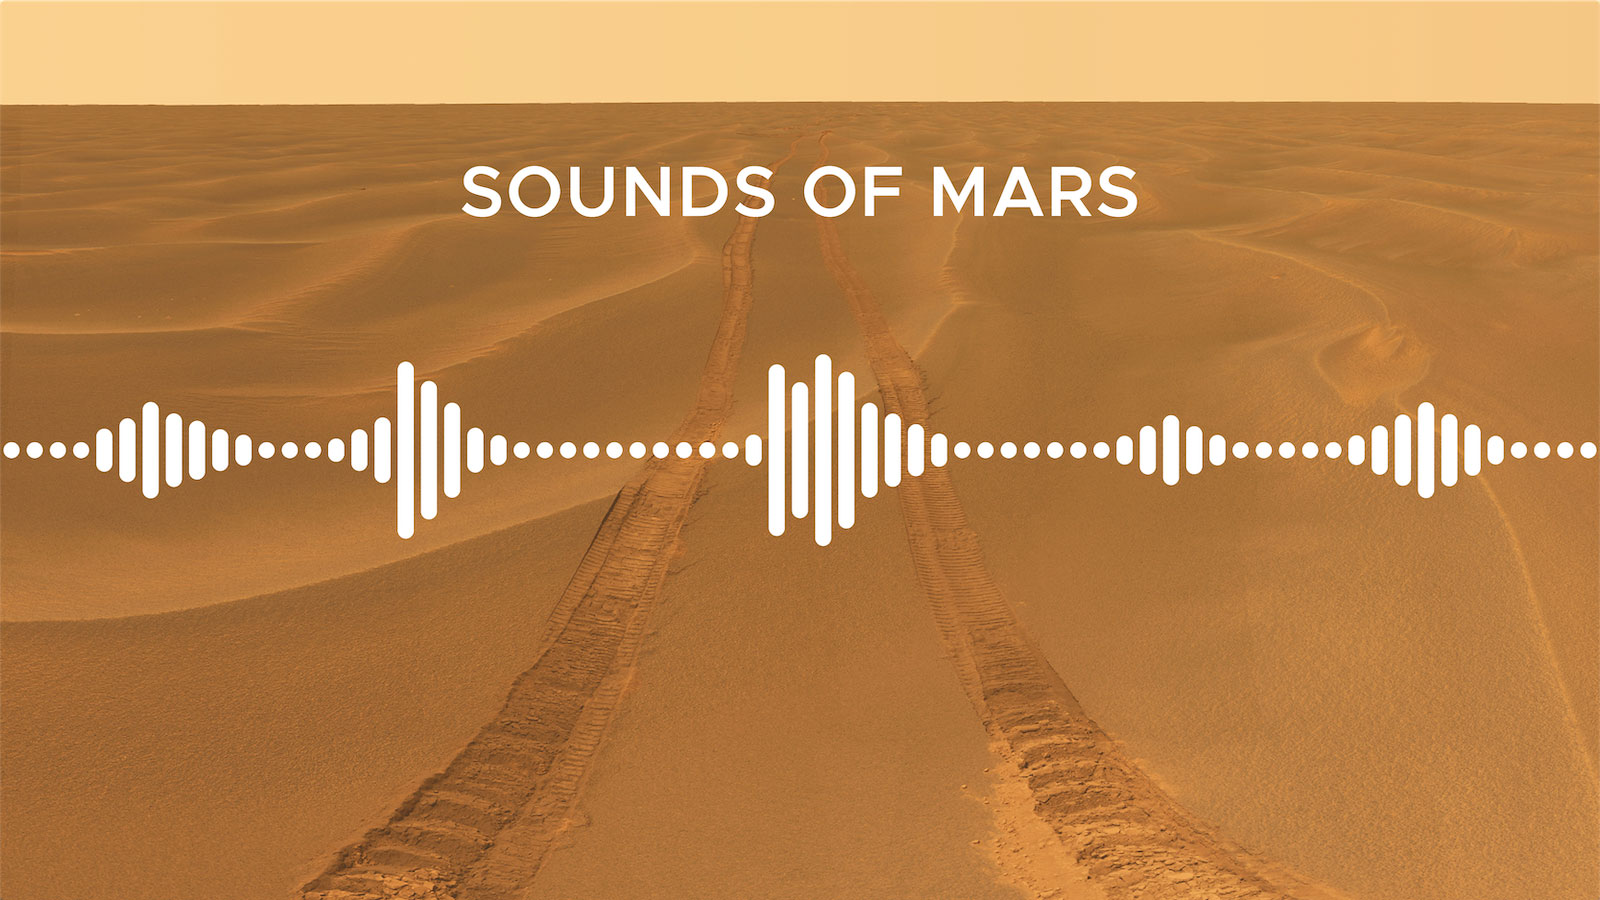 Illustration of Mars and sounds